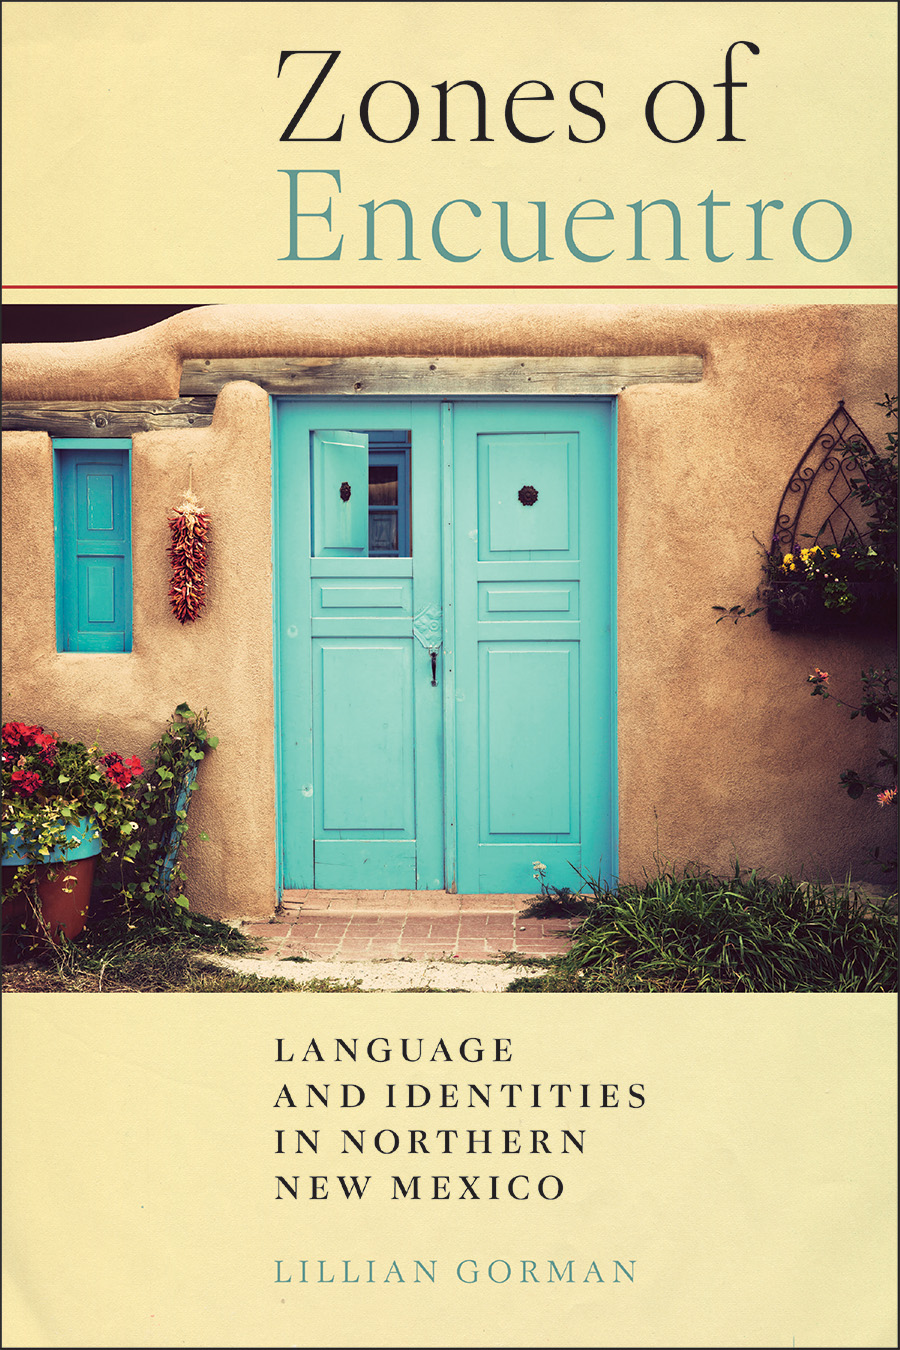 Zones of Encuentro: Language and Identities in Northern New Mexico book cover